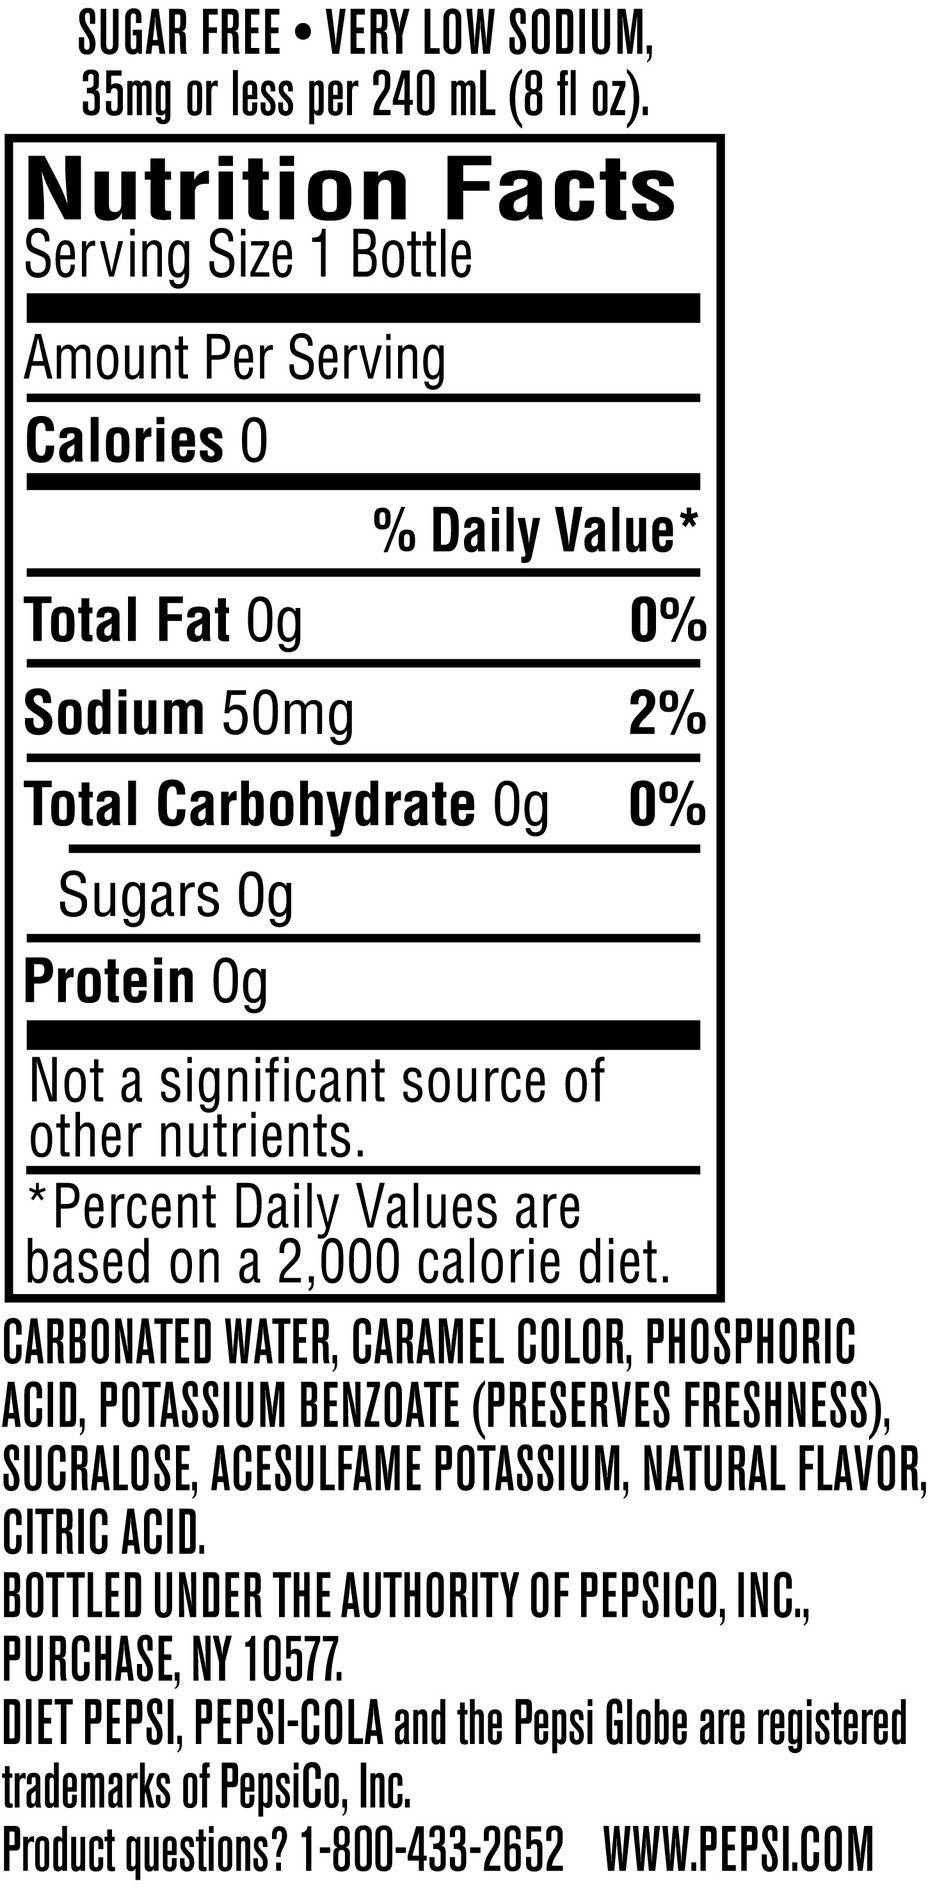 Image describing nutrition information for product Caffeine Free Diet Pepsi